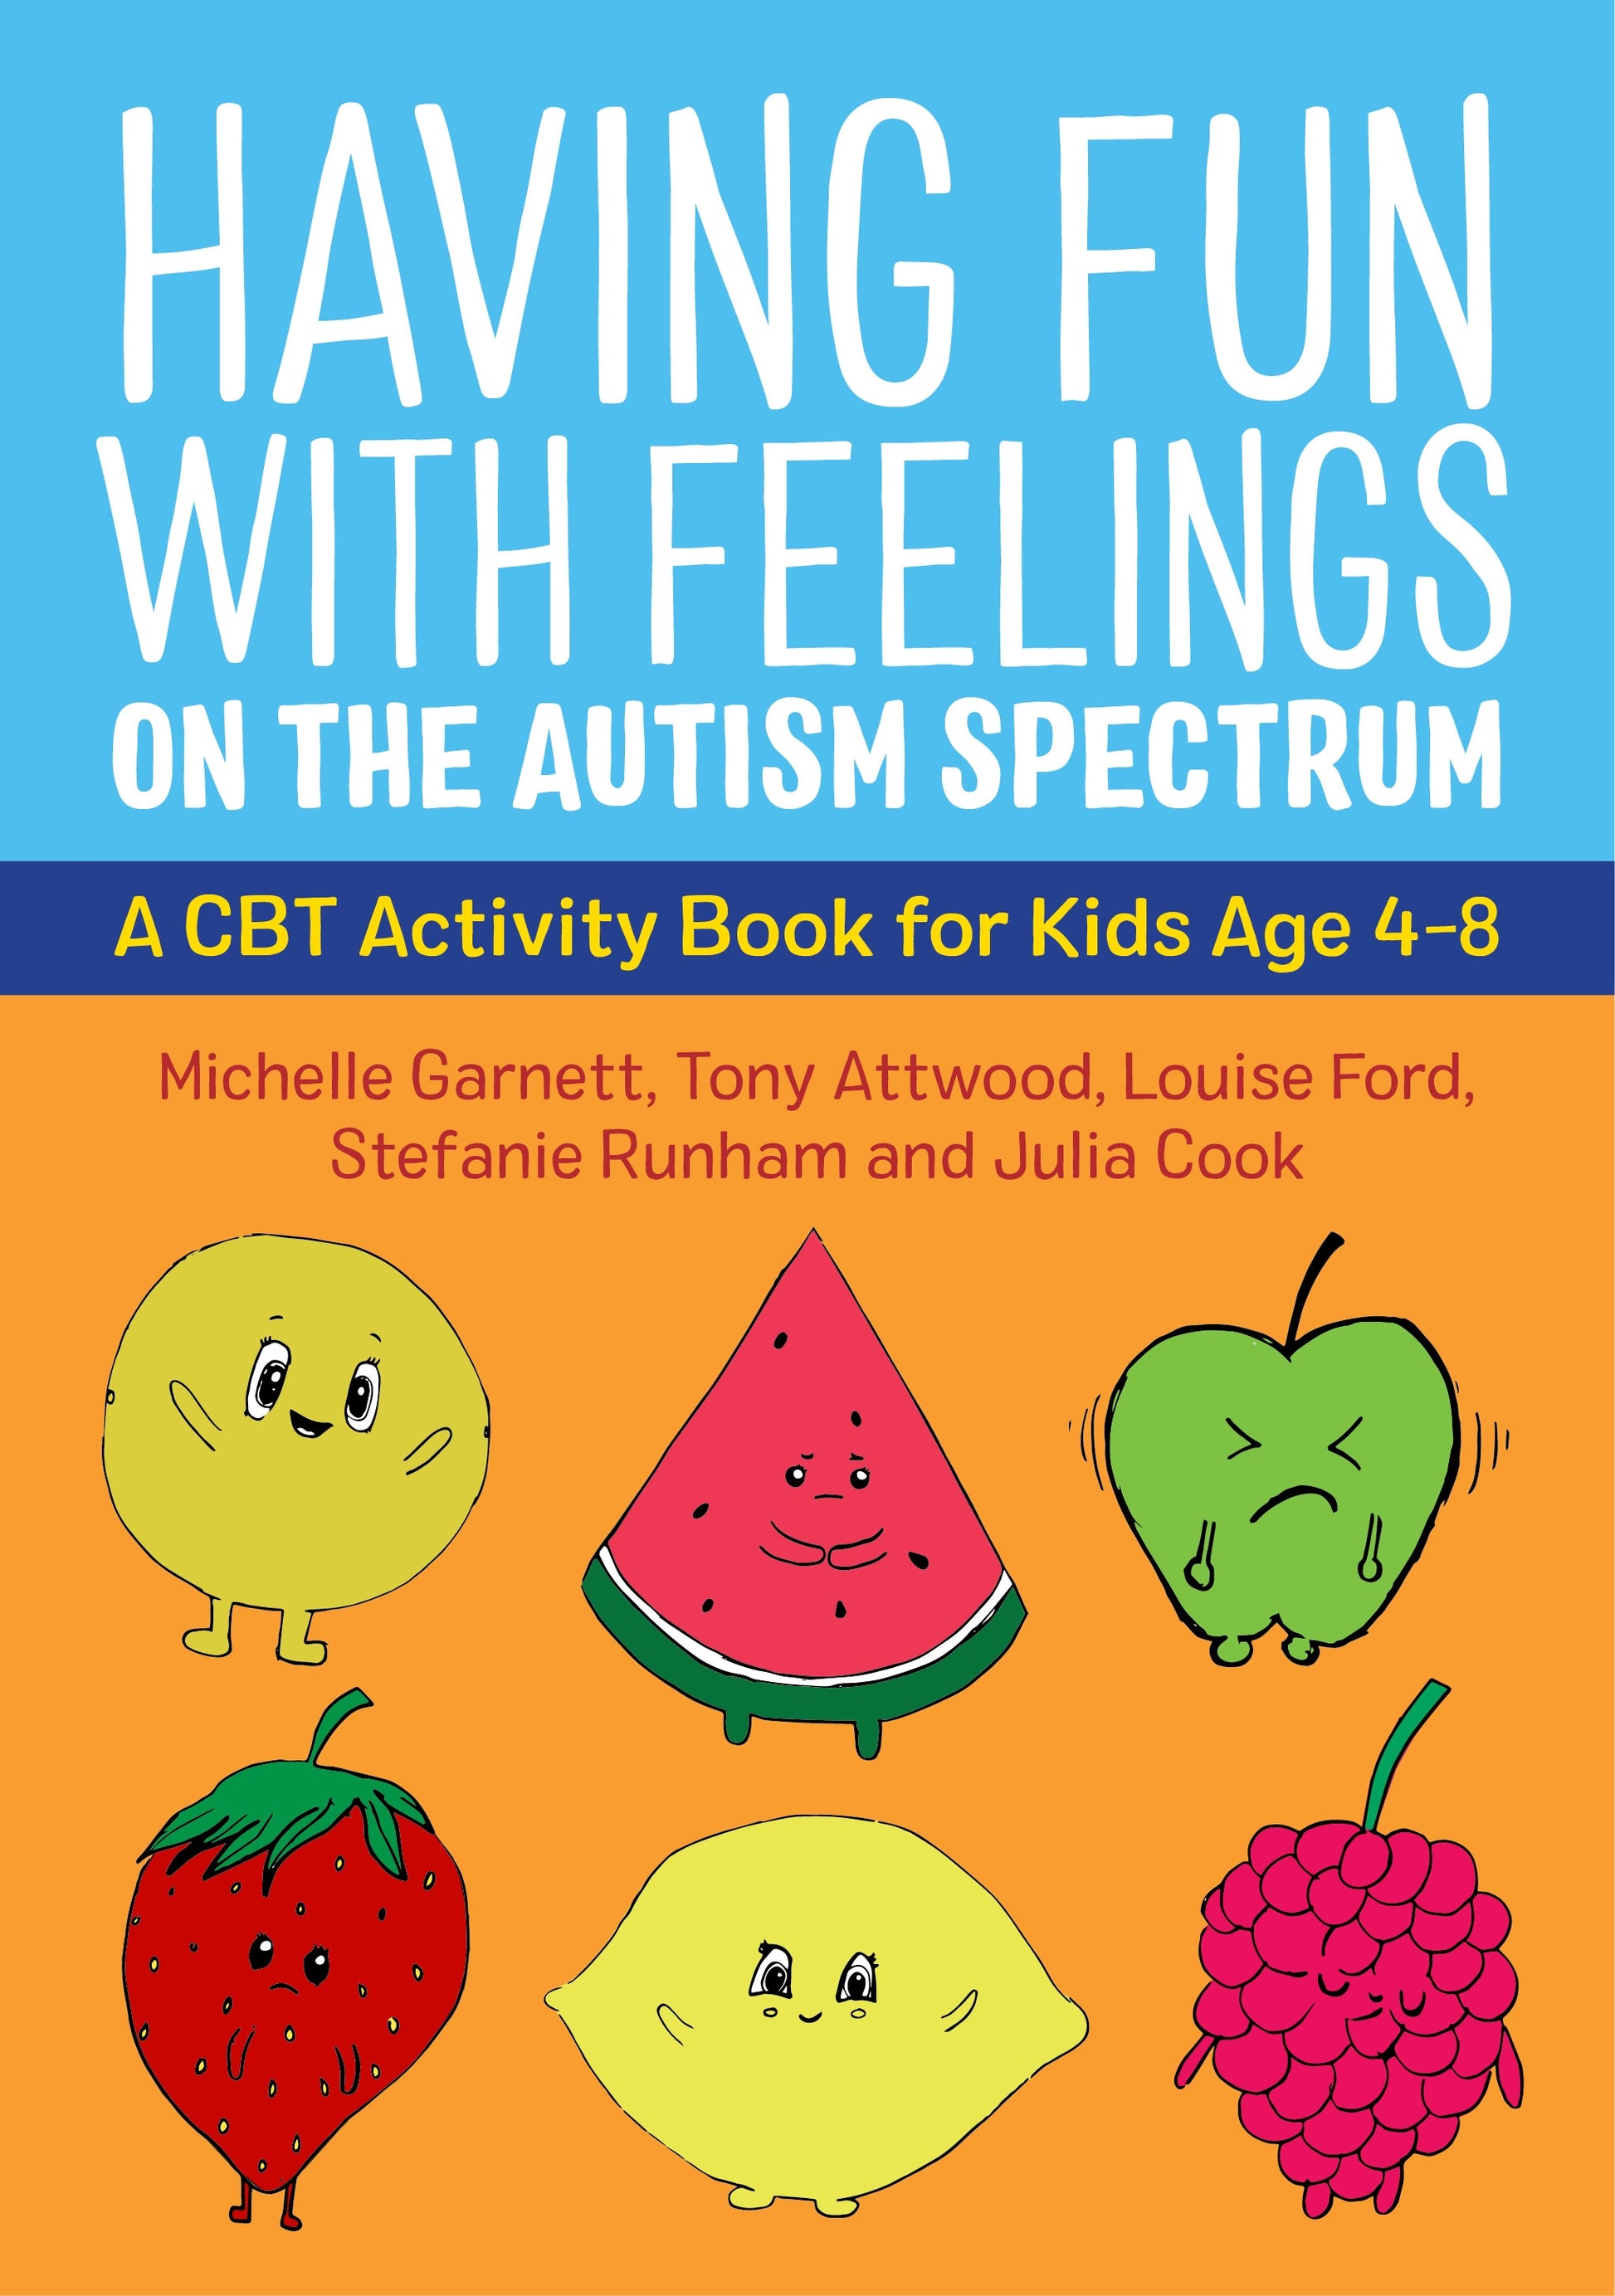 Having Fun with Feelings on the Autism Spectrum by Michelle Garnett, Dr Anthony Attwood, Julia Cook, Louise Ford, Stefanie Runham